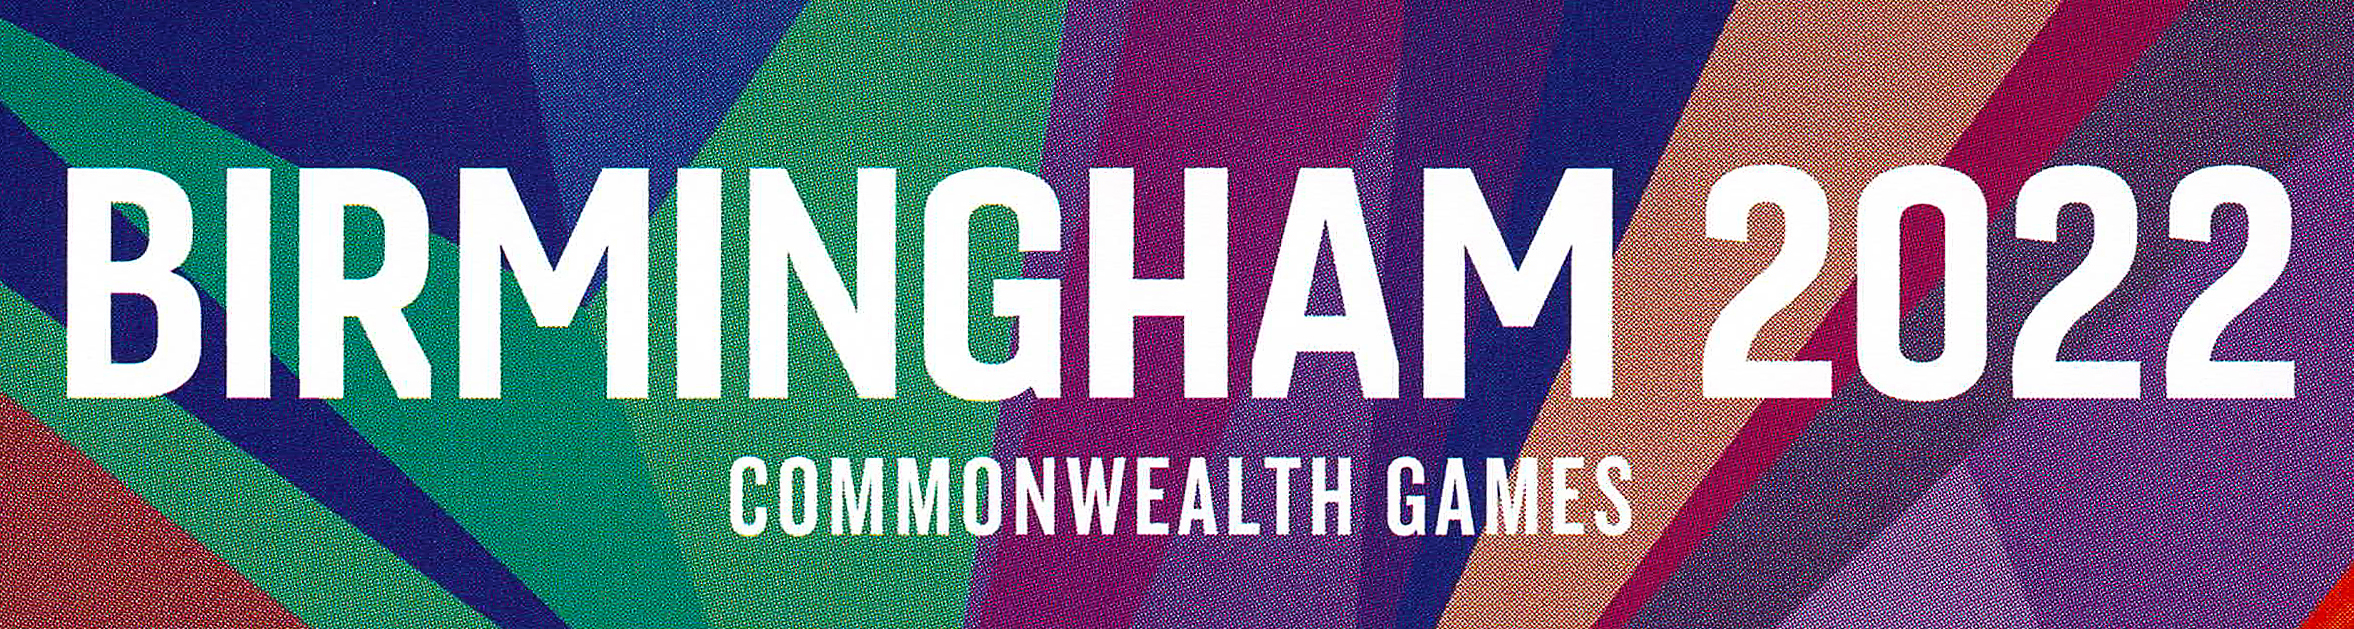 Commonwealth Games - 2022 Issue